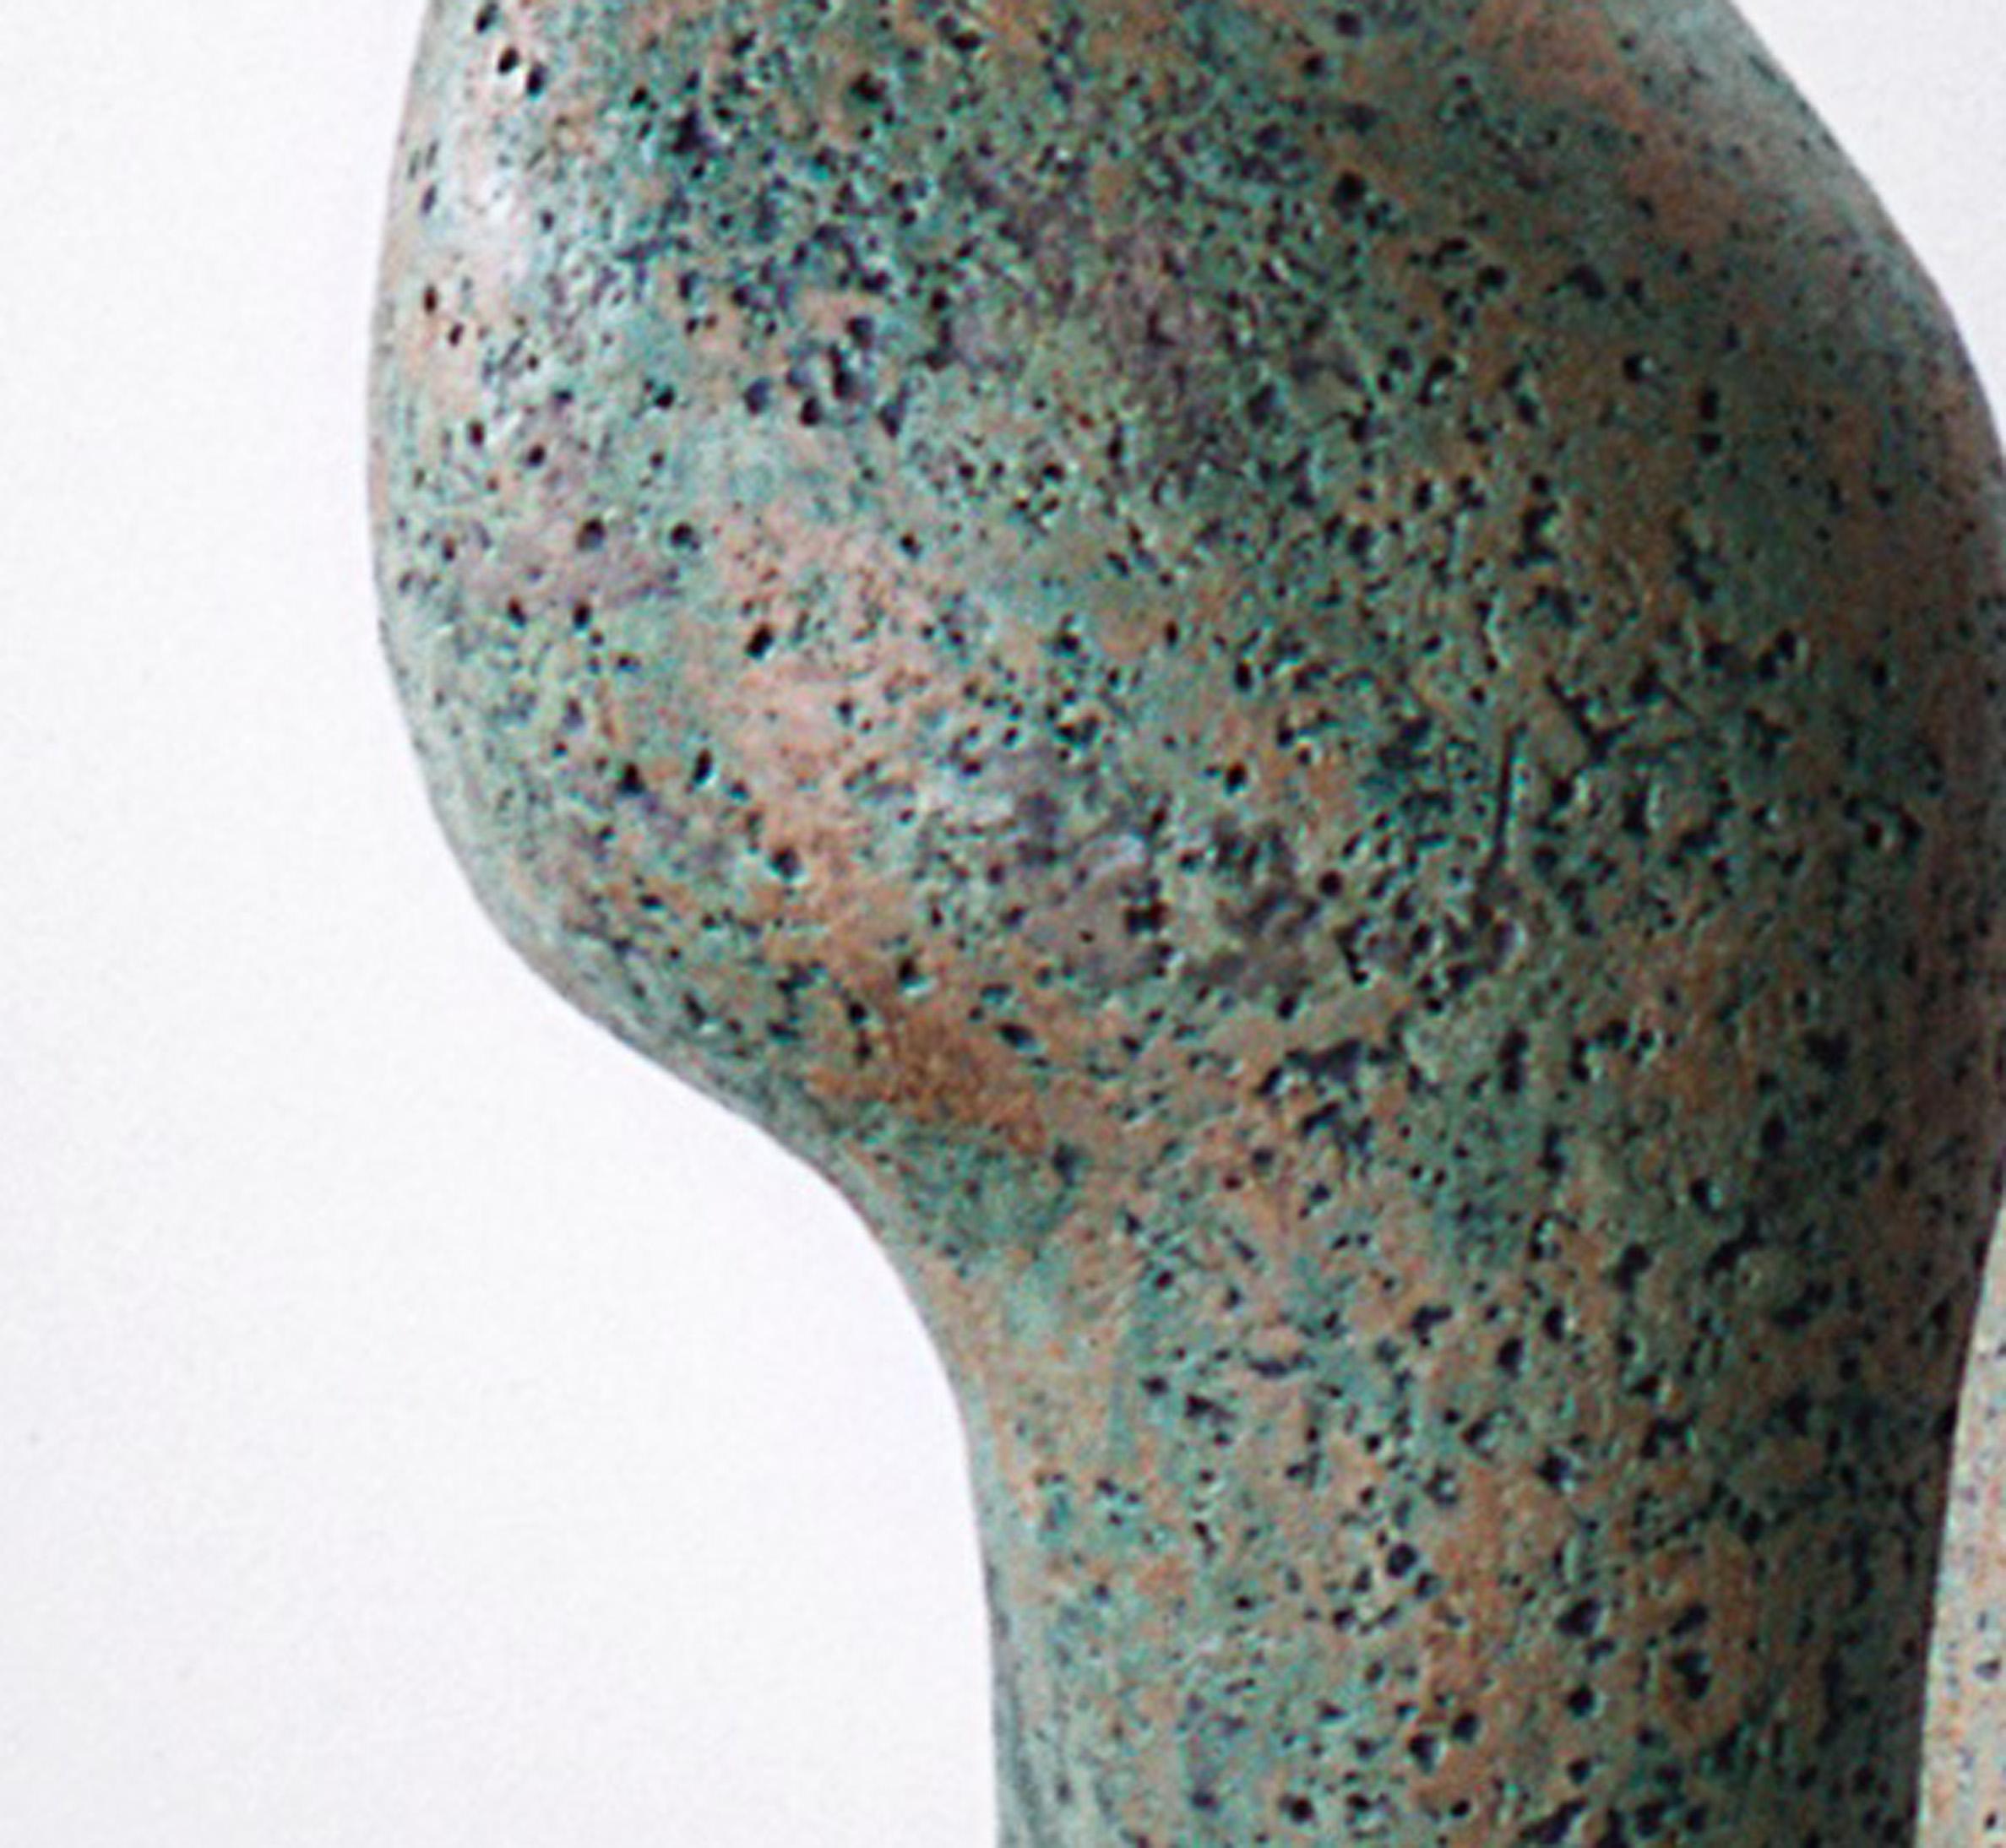 “Tête-a-Tête”, blue-green and brown ceramic sculpture of intimacy - Abstract Sculpture by Elaine Lorenz